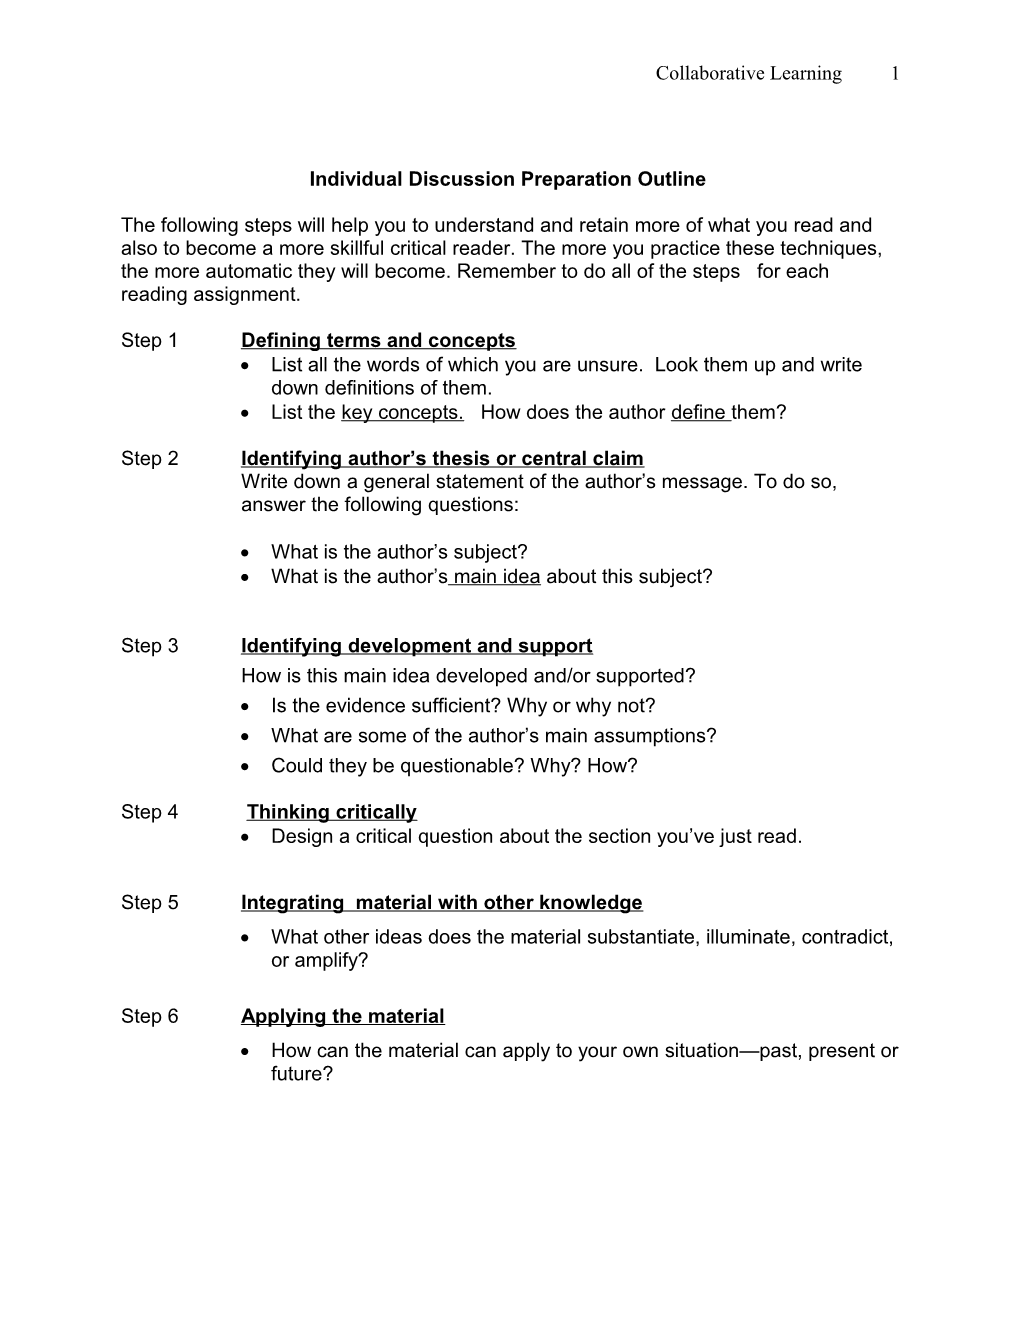 Individual Discussion Preparation Outline